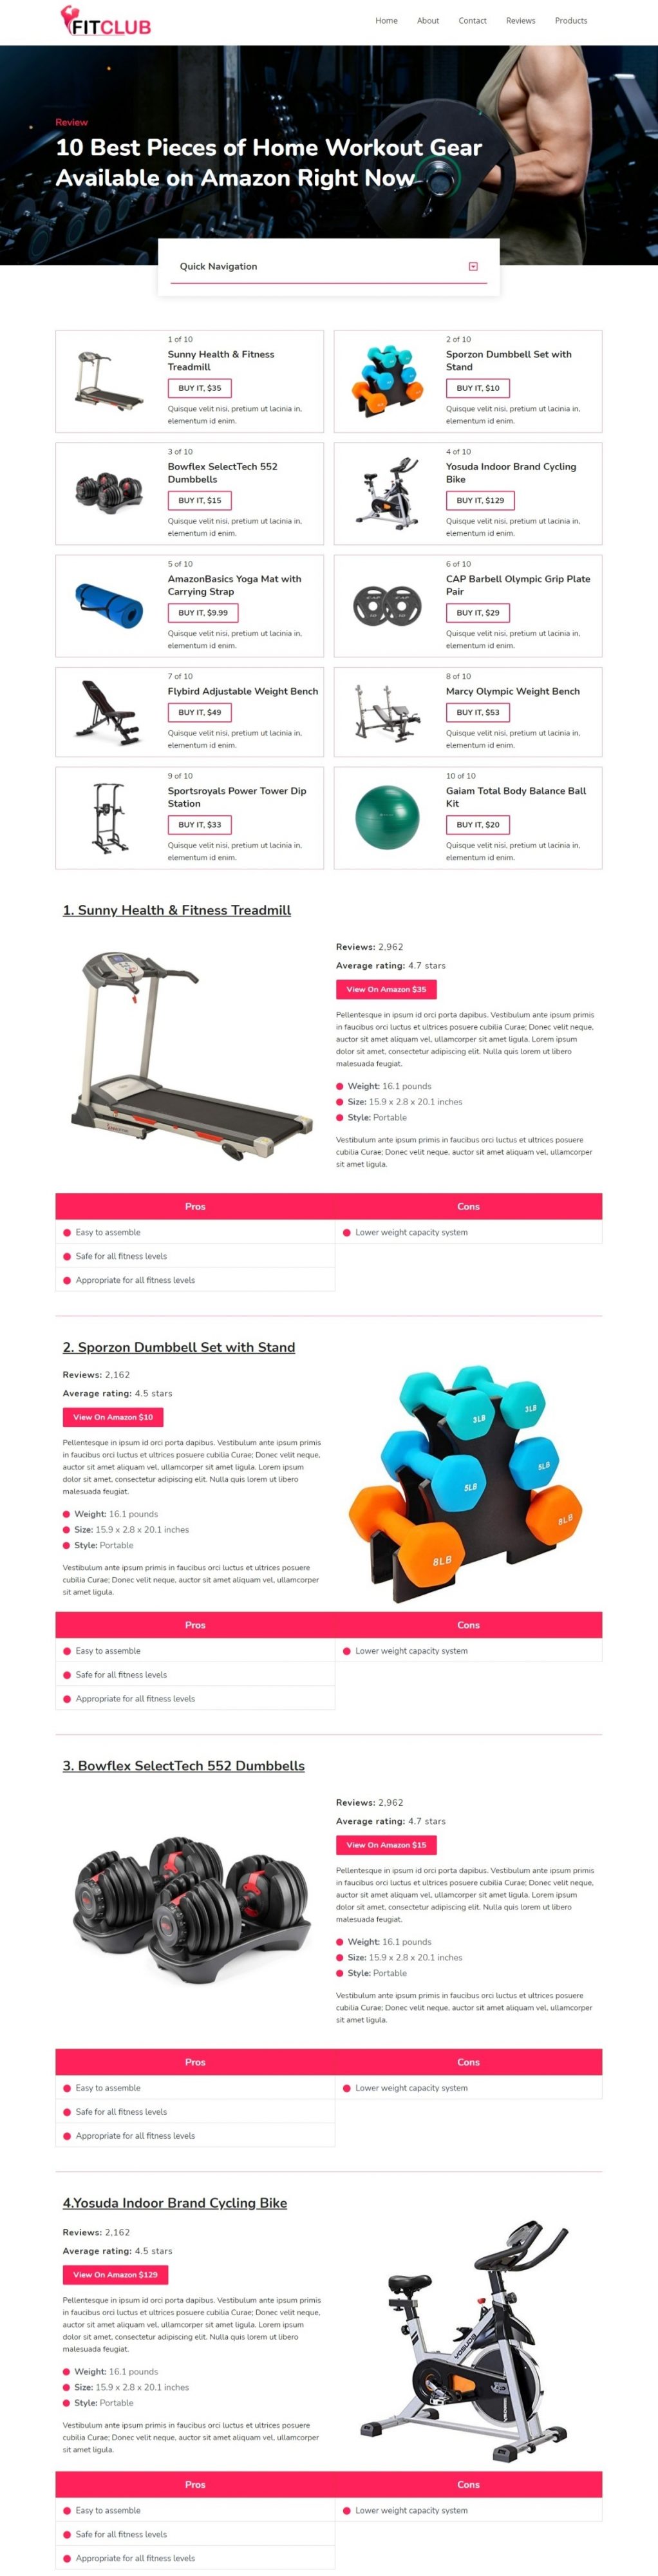 fitclub-amazon-product-review-page-template